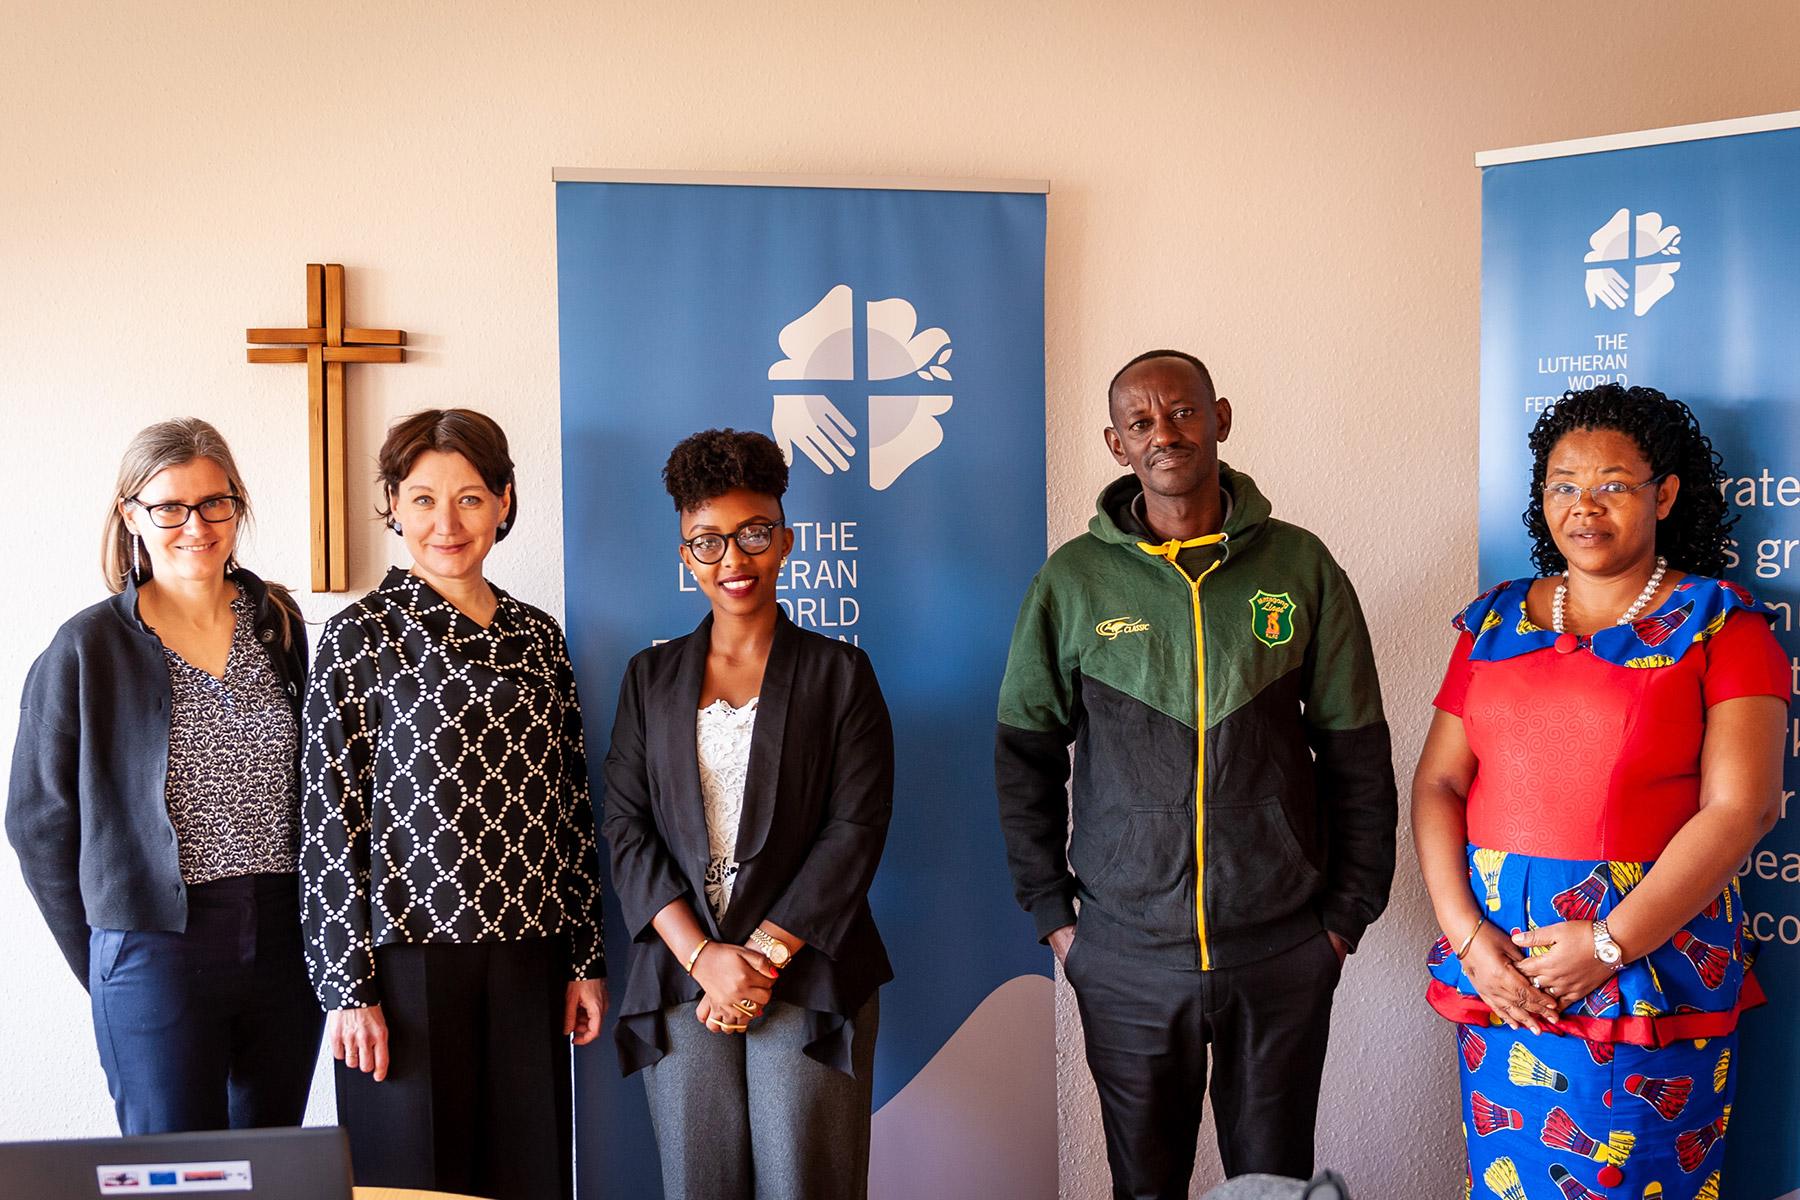 A delegation from LWF Burundi met with UN member states ahead of the UPR in Geneva, Switzerland. Photo: LWF/S. Gallay